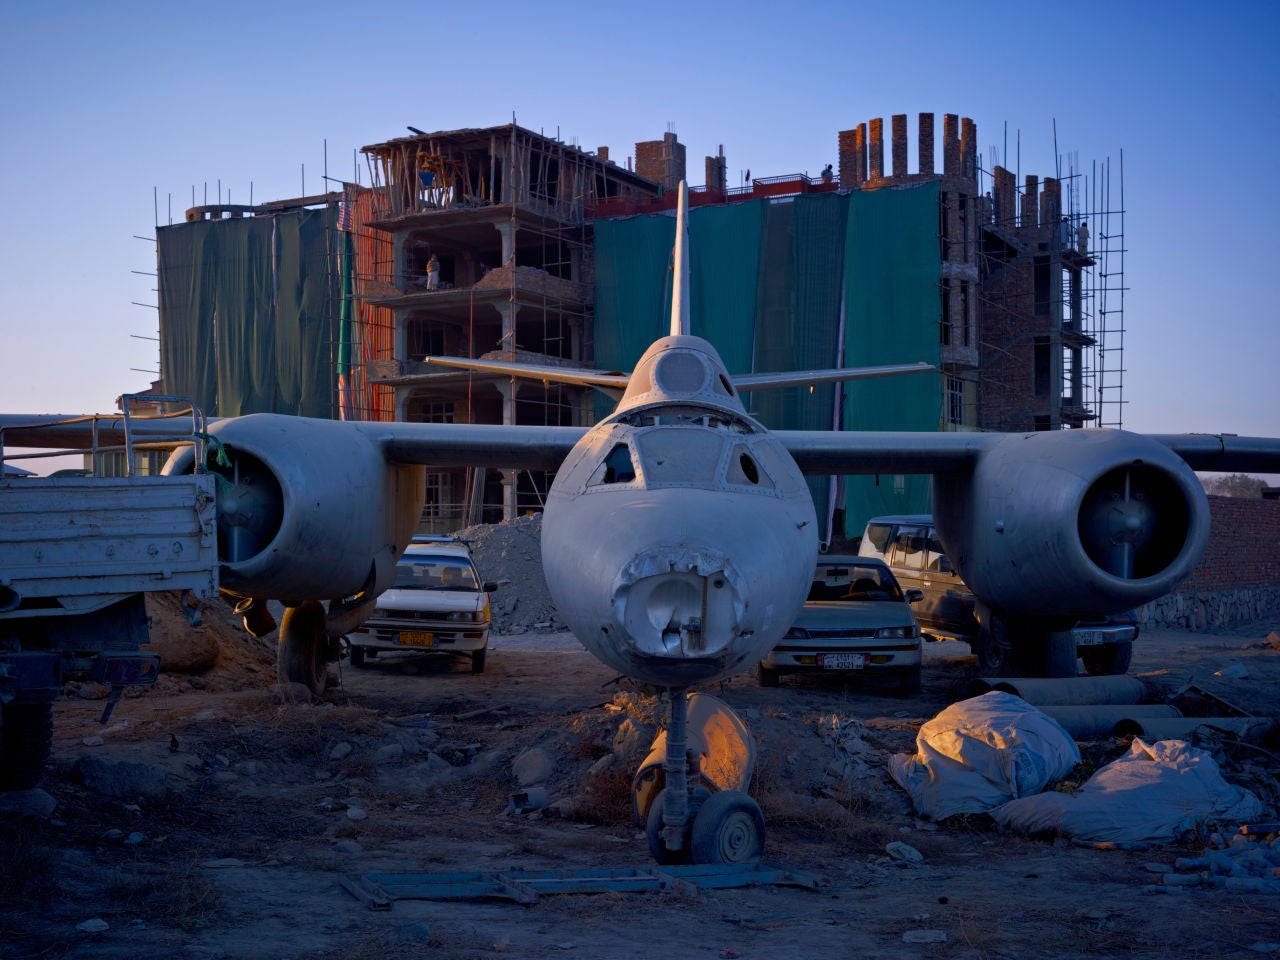 Simon Norfolk Color Photograph - A Dumping Ground For An Abandoned Russian-Era Bomber